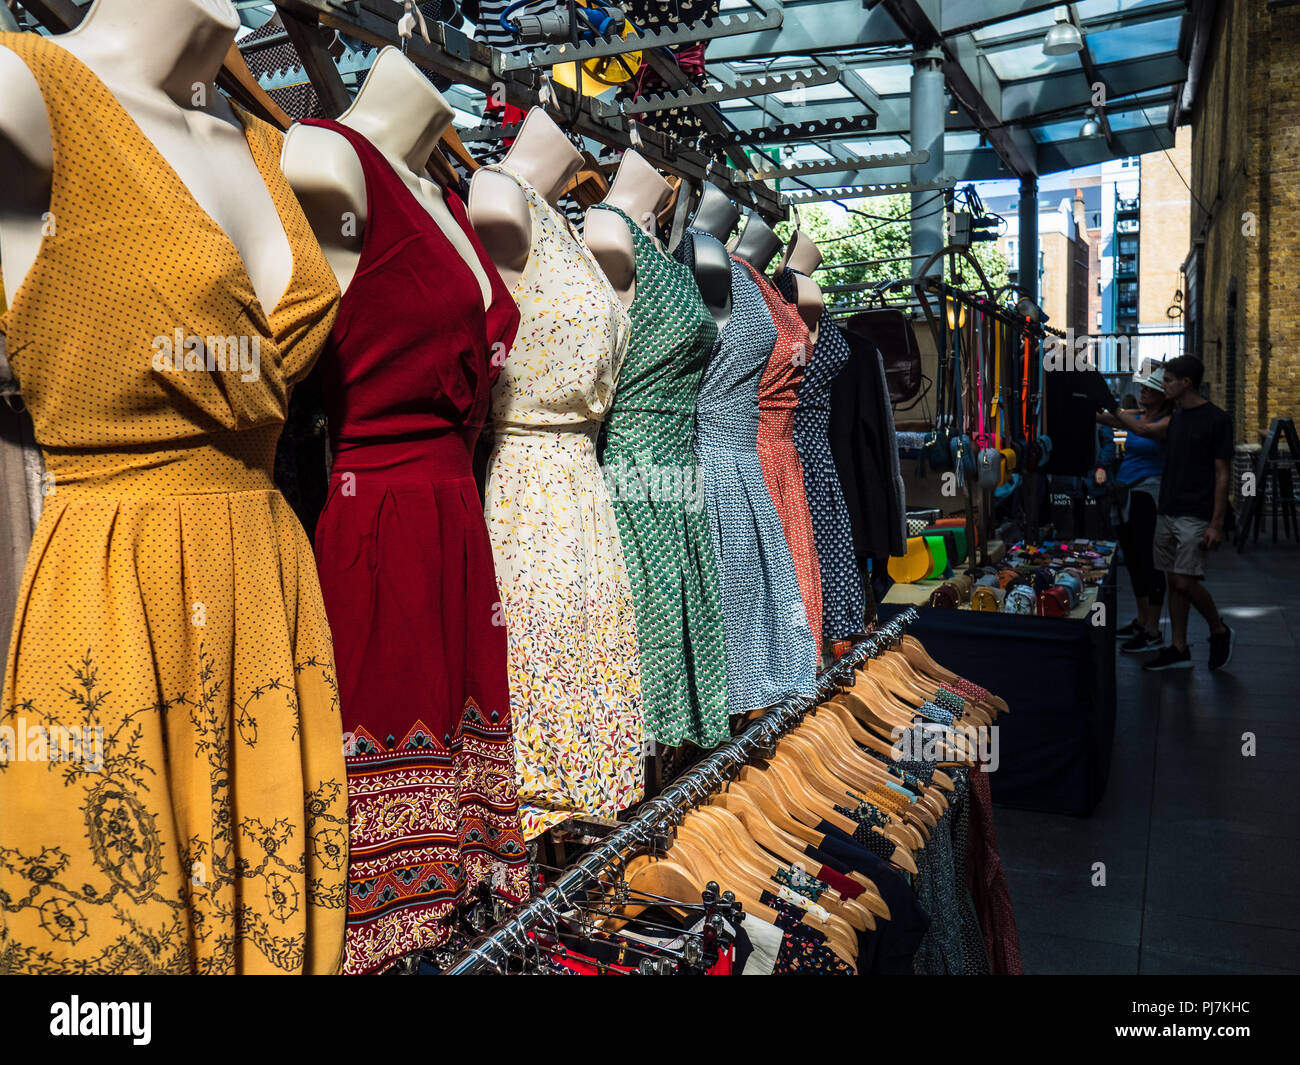 Vintage Clothes London - Vintage Clothing for sale in London's Spitalfields Market Stock Photo